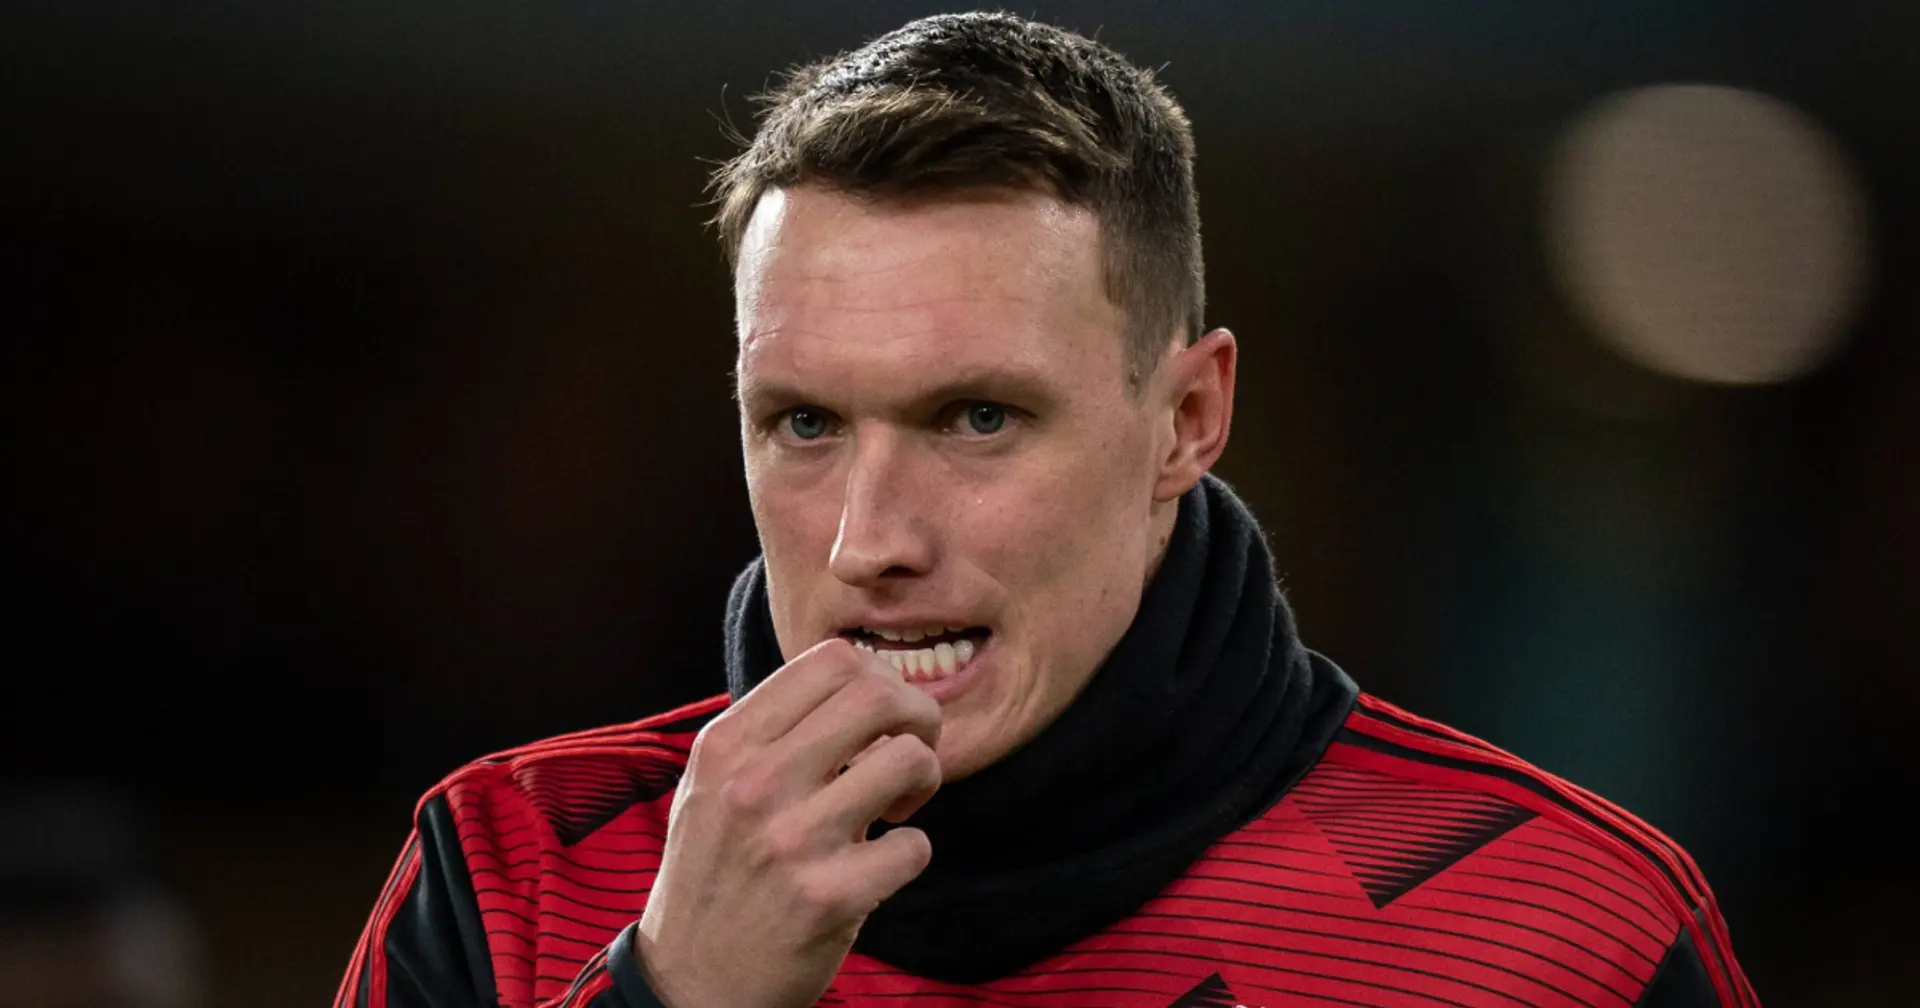 'When he’s played he gives everything': Man United fan makes compelling case to back Phil Jones